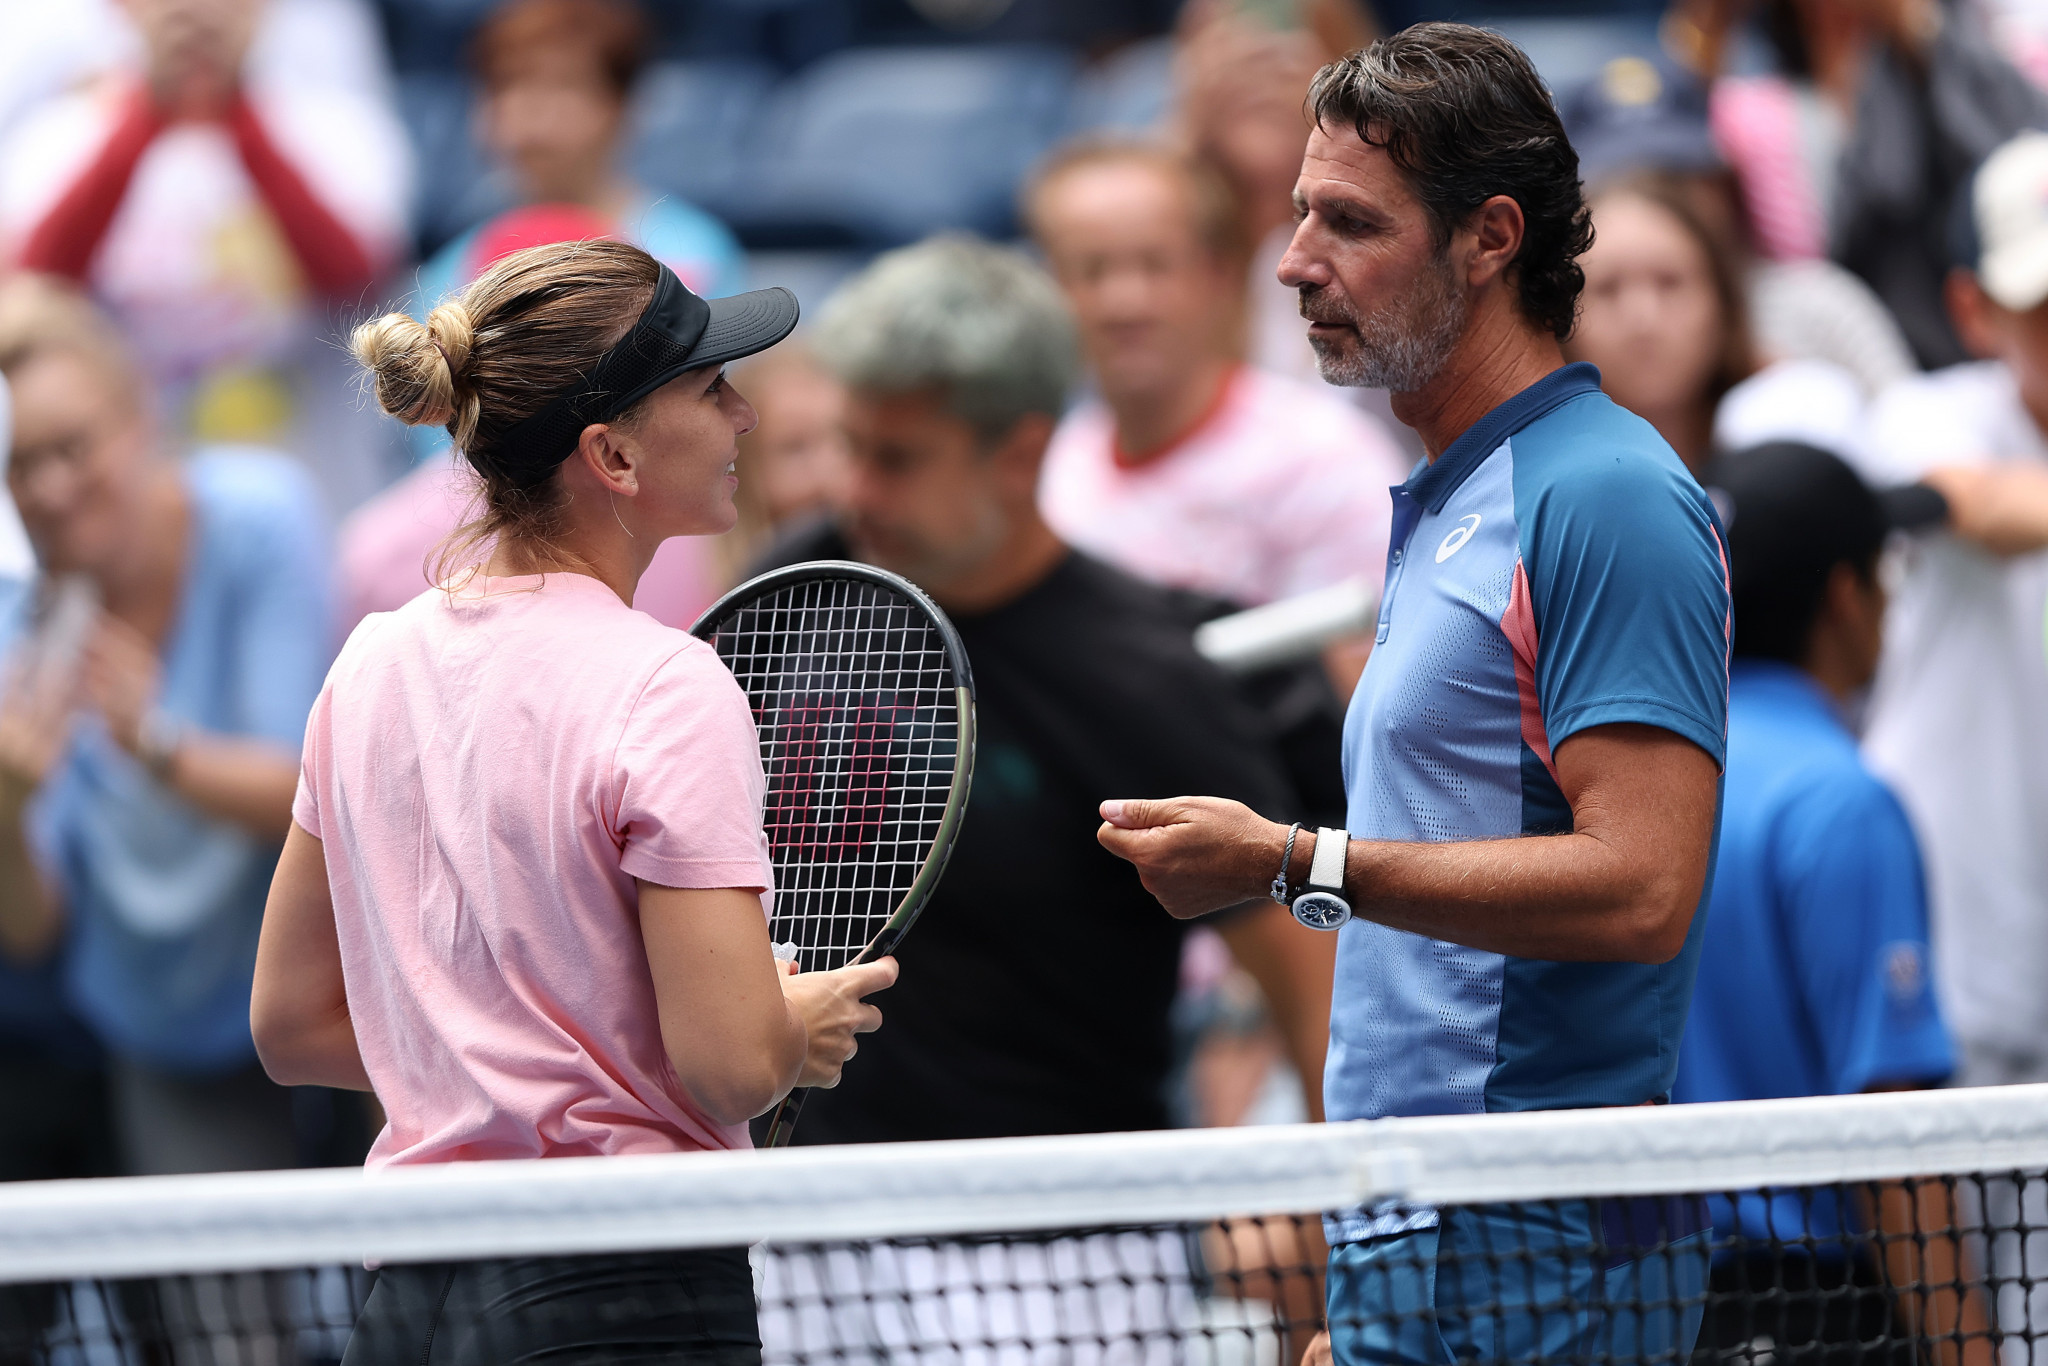 Patrick Mouratoglou, who coached Simona Halep at the 2022 US Open where she tested positive, has defended the Romanian tennis star ©Getty Images